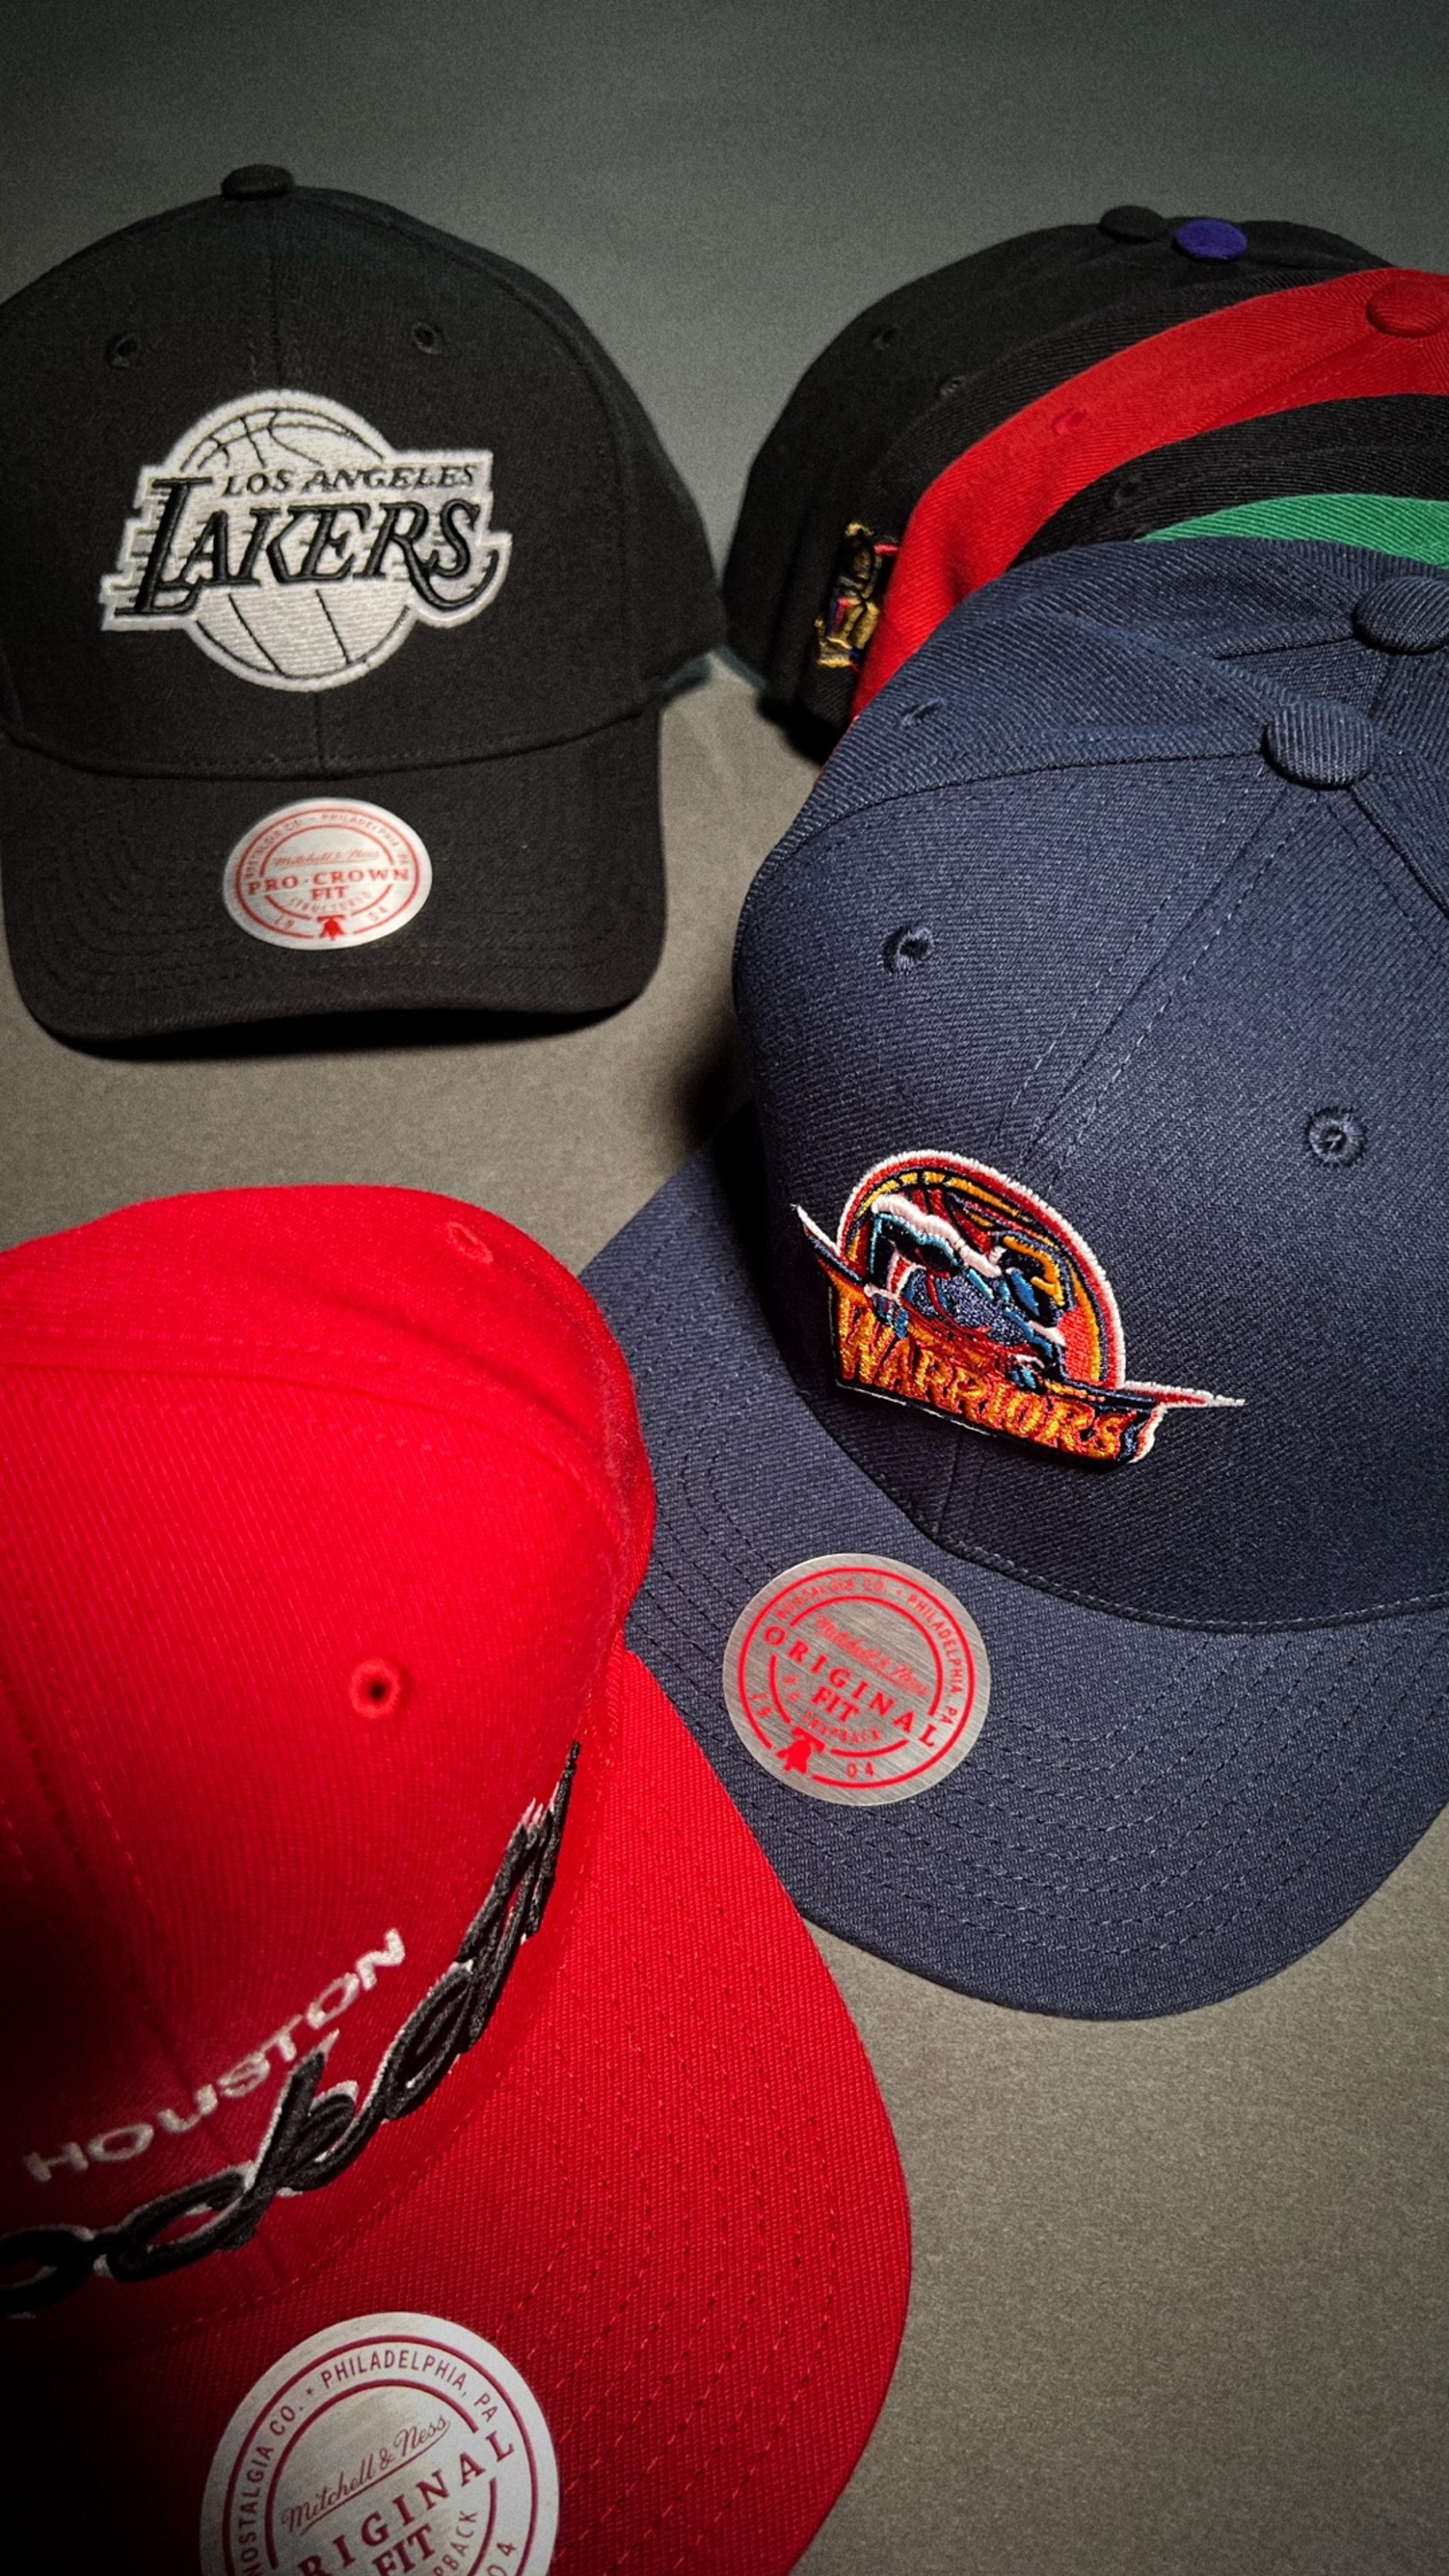 Preview image for the show titled "A Fresh New Look : Mitchell & Ness" at Today @ 7:30 PM